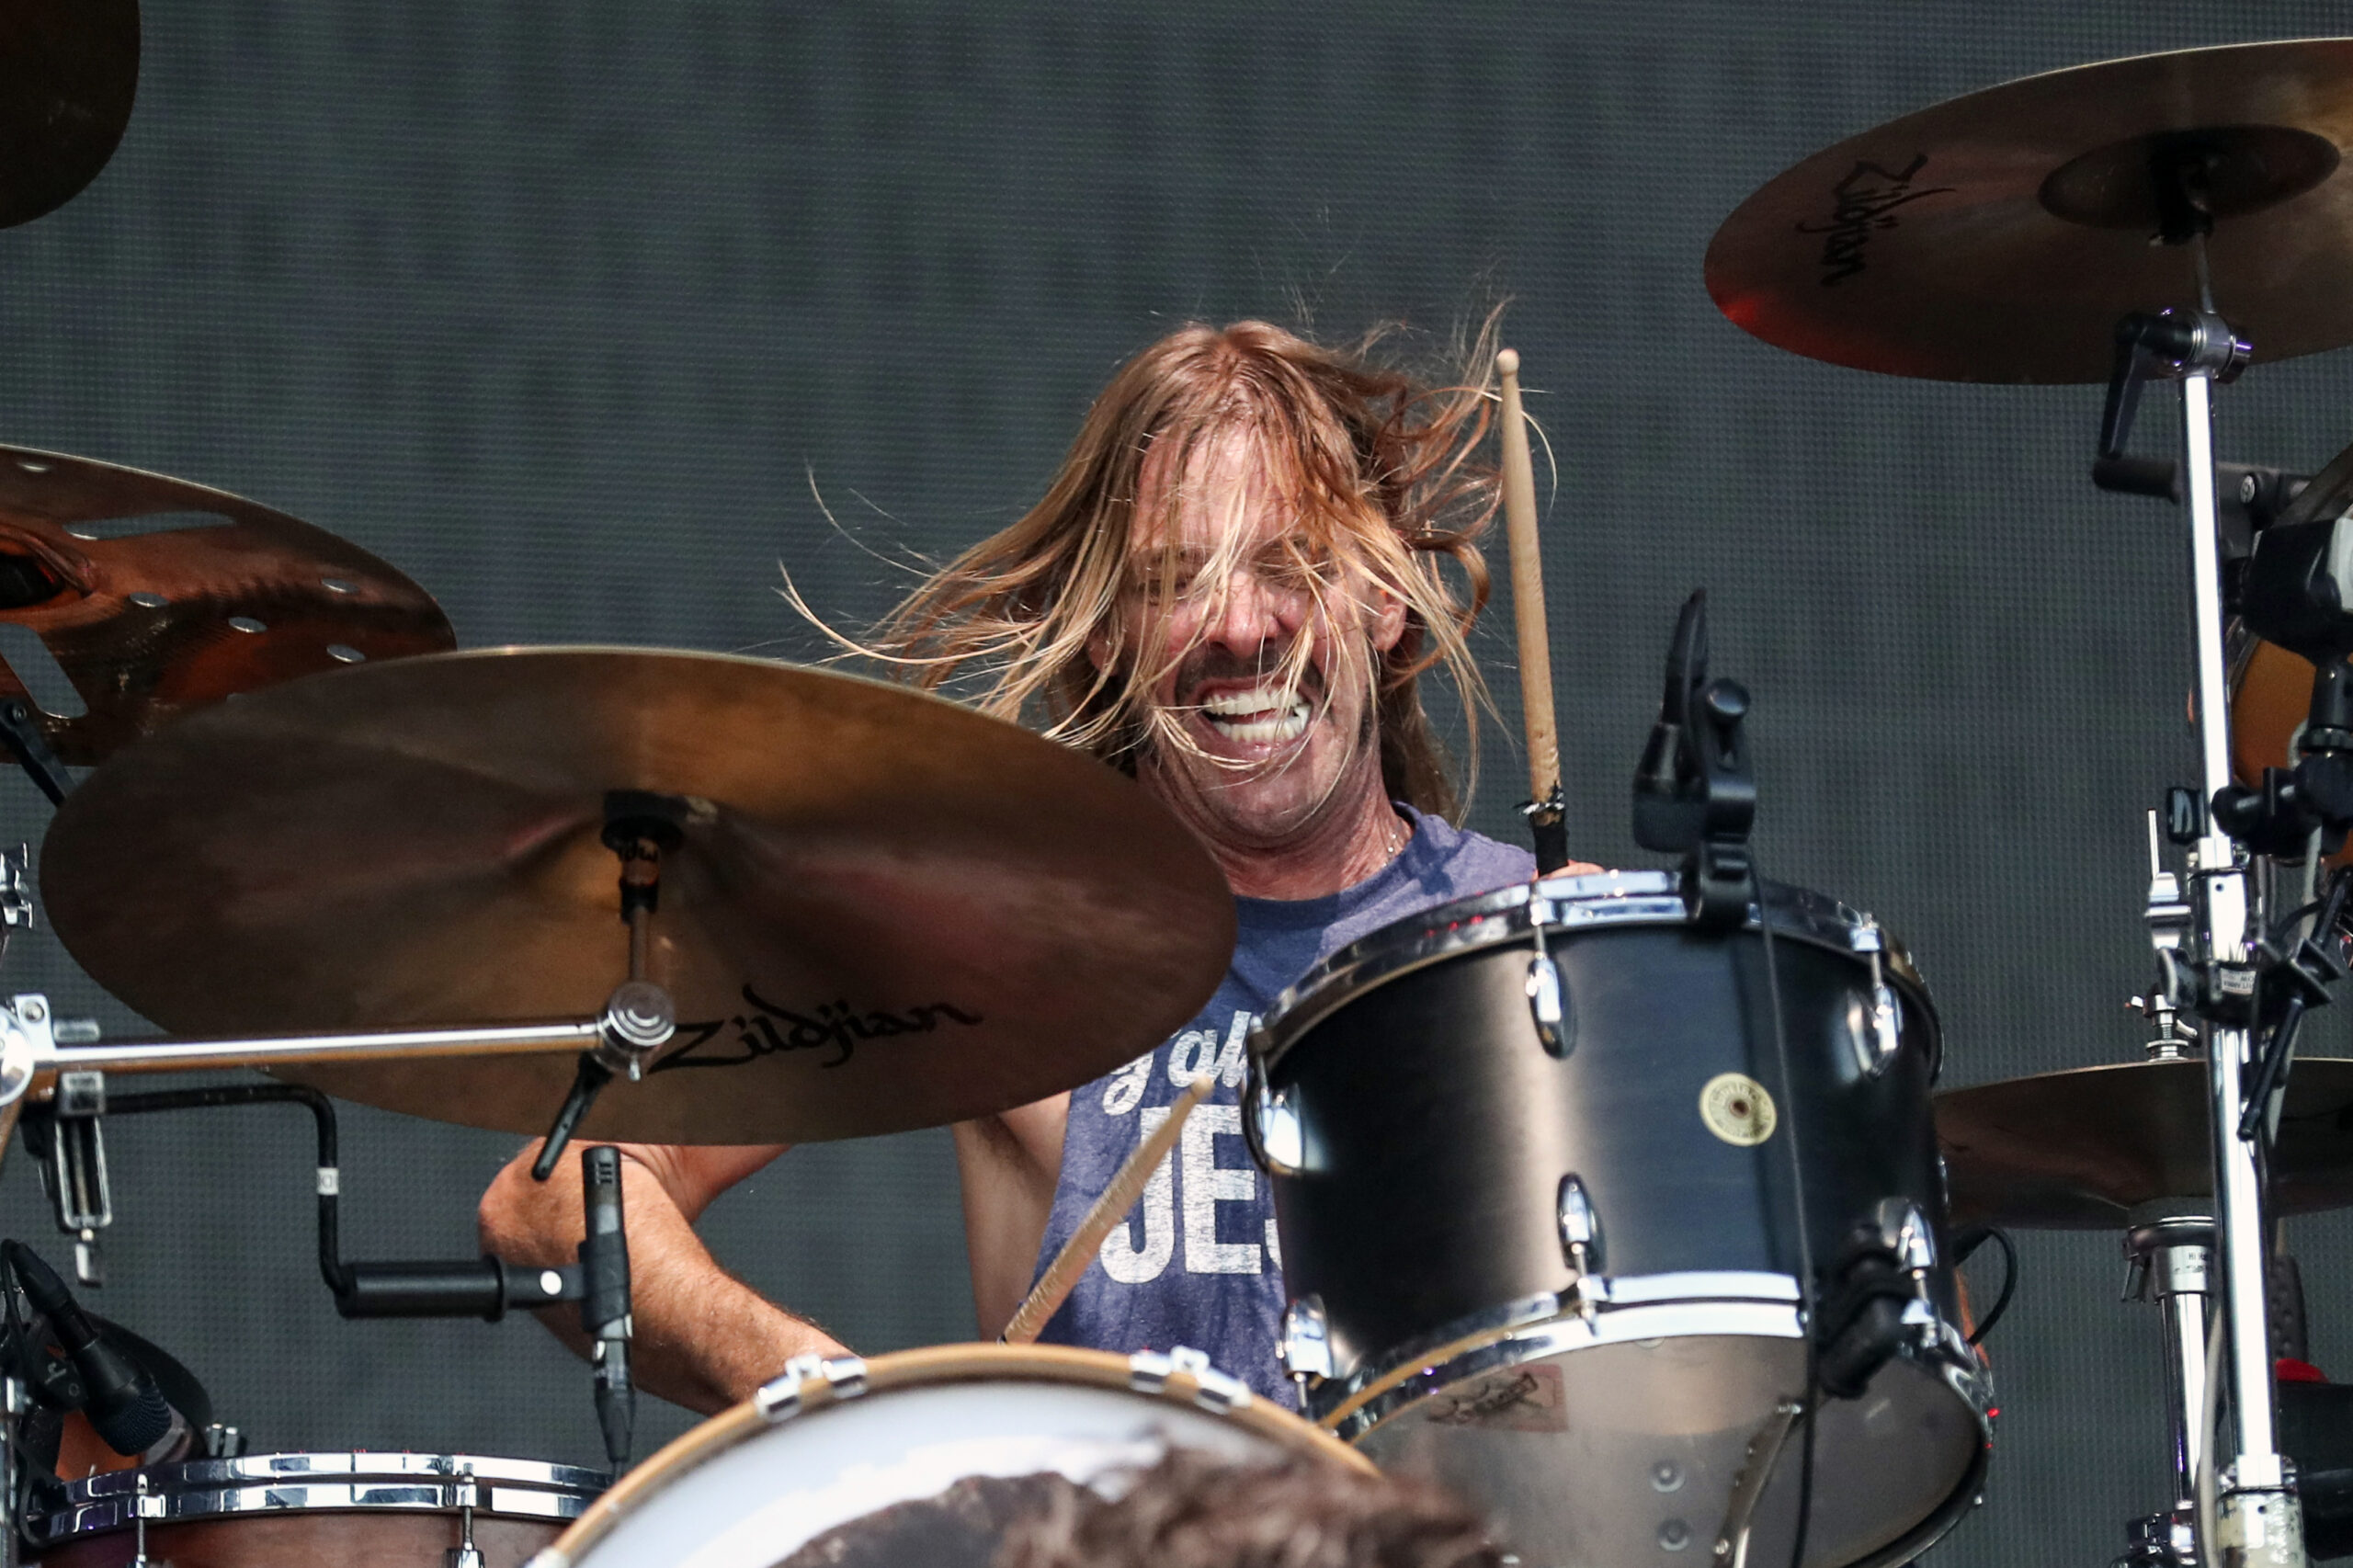 FILE - Taylor Hawkins of the Foo Fighters performs at Pilgrimage Music and Cultural Festival at The Park at Harlinsdale on Sunday, Sept. 22, 2019, in Franklin, Tenn. Hawkins, the longtime drummer for the rock band Foo Fighters, has died, according to reports, Friday, March 25, 2022. He was 50. (Photo by Al Wagner/Invision/AP, File)